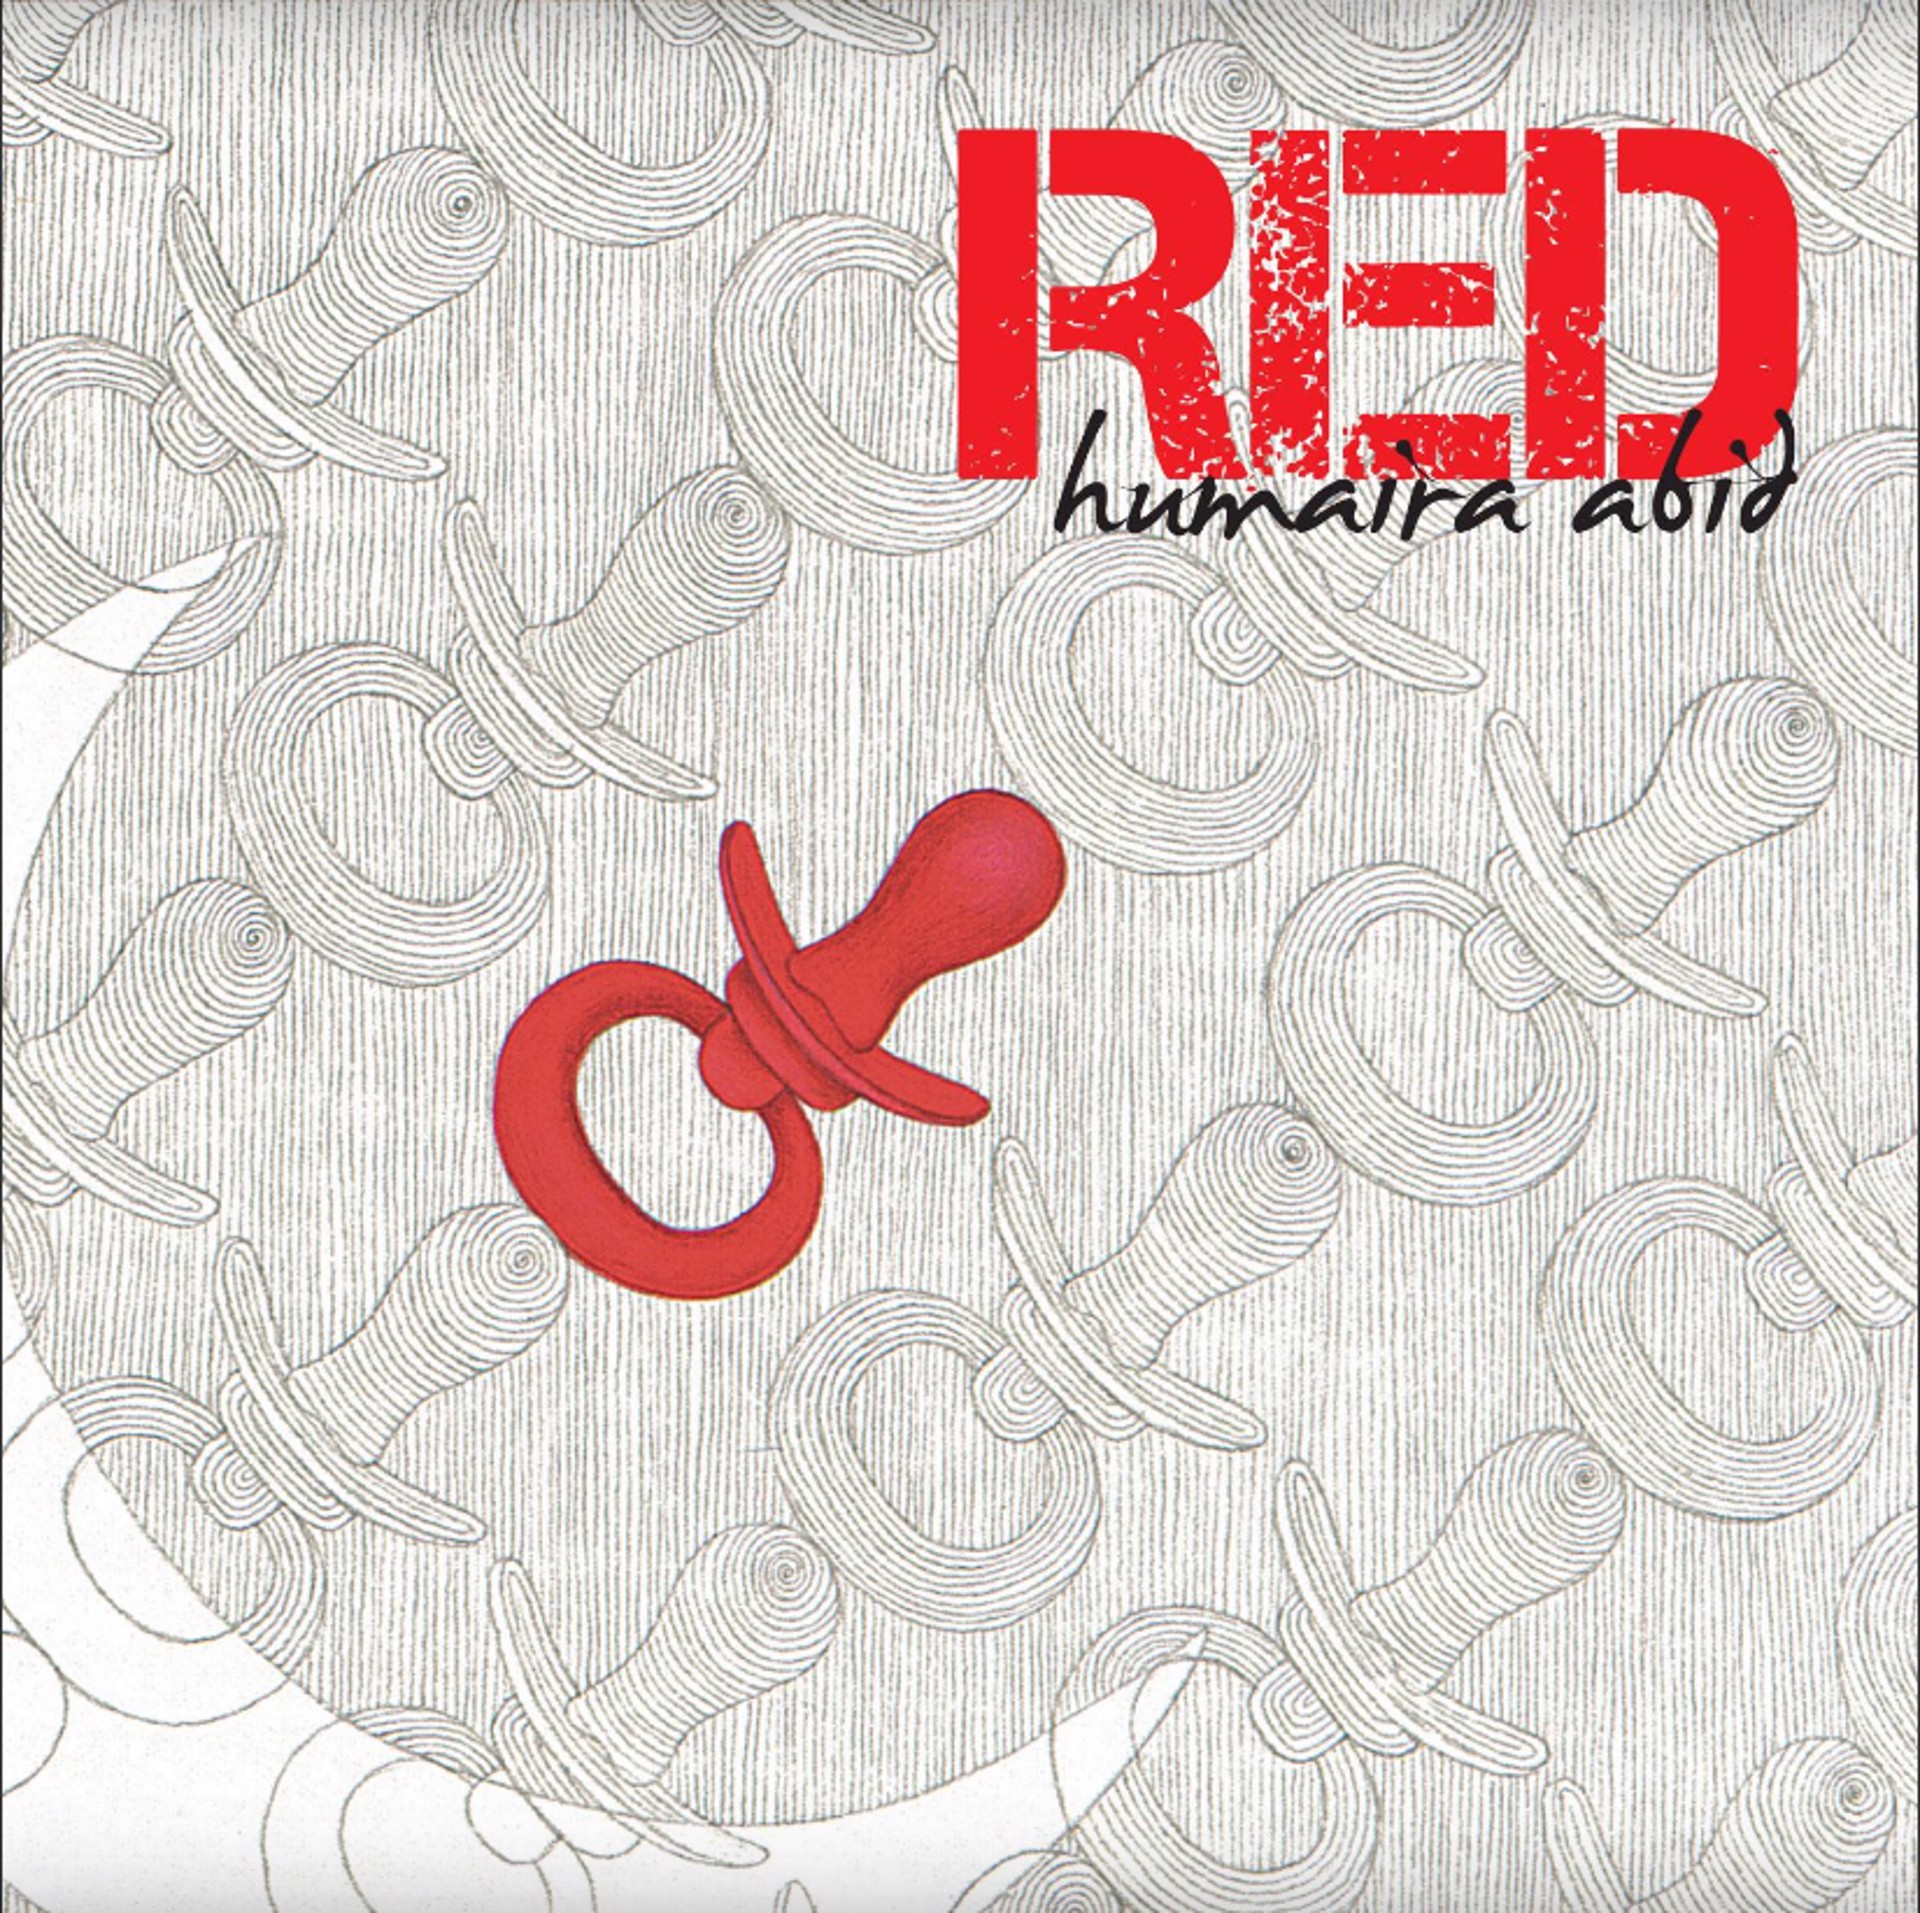 RED | Exhibition Catalog by Humaira Abid